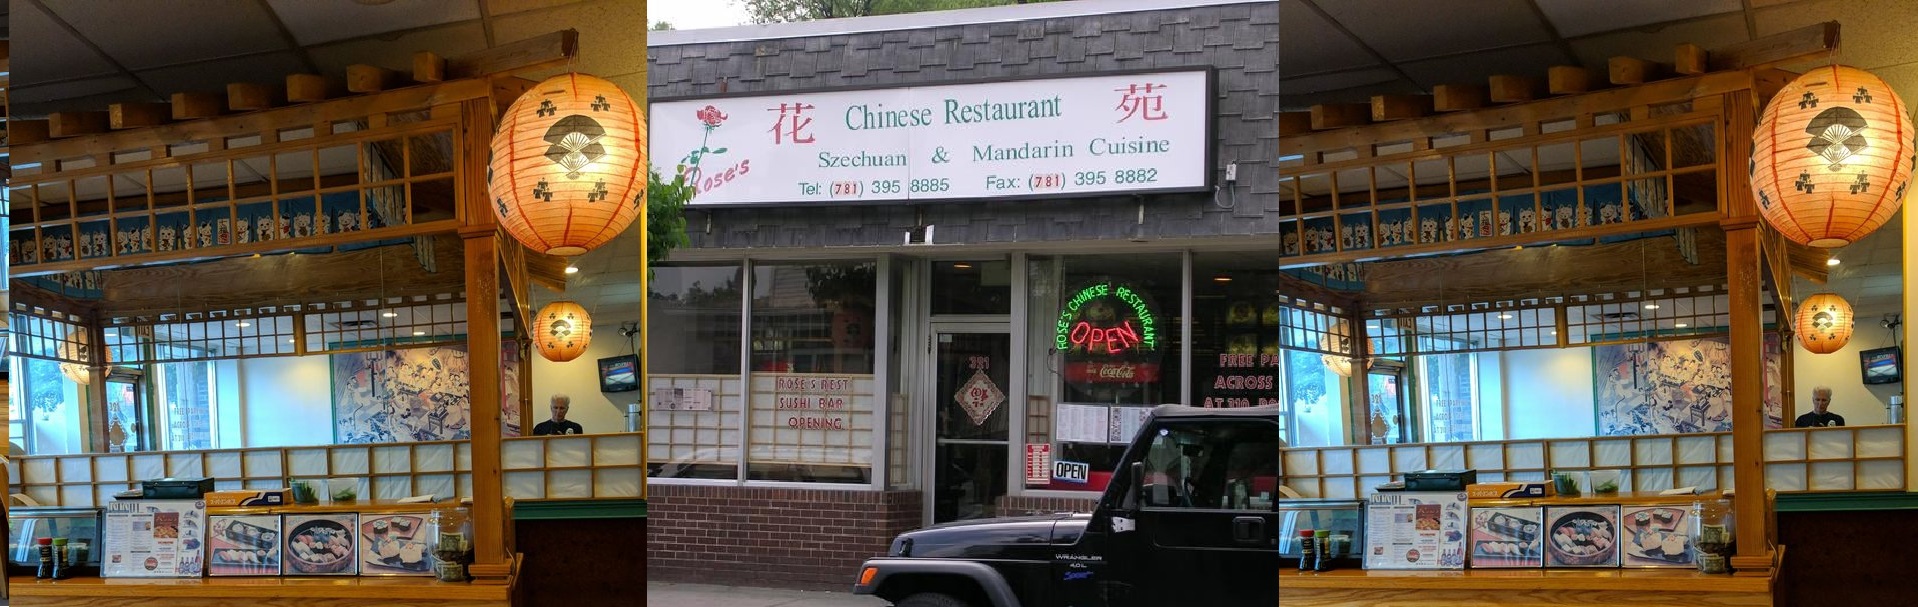 Your favorite Chinese food at Rose's